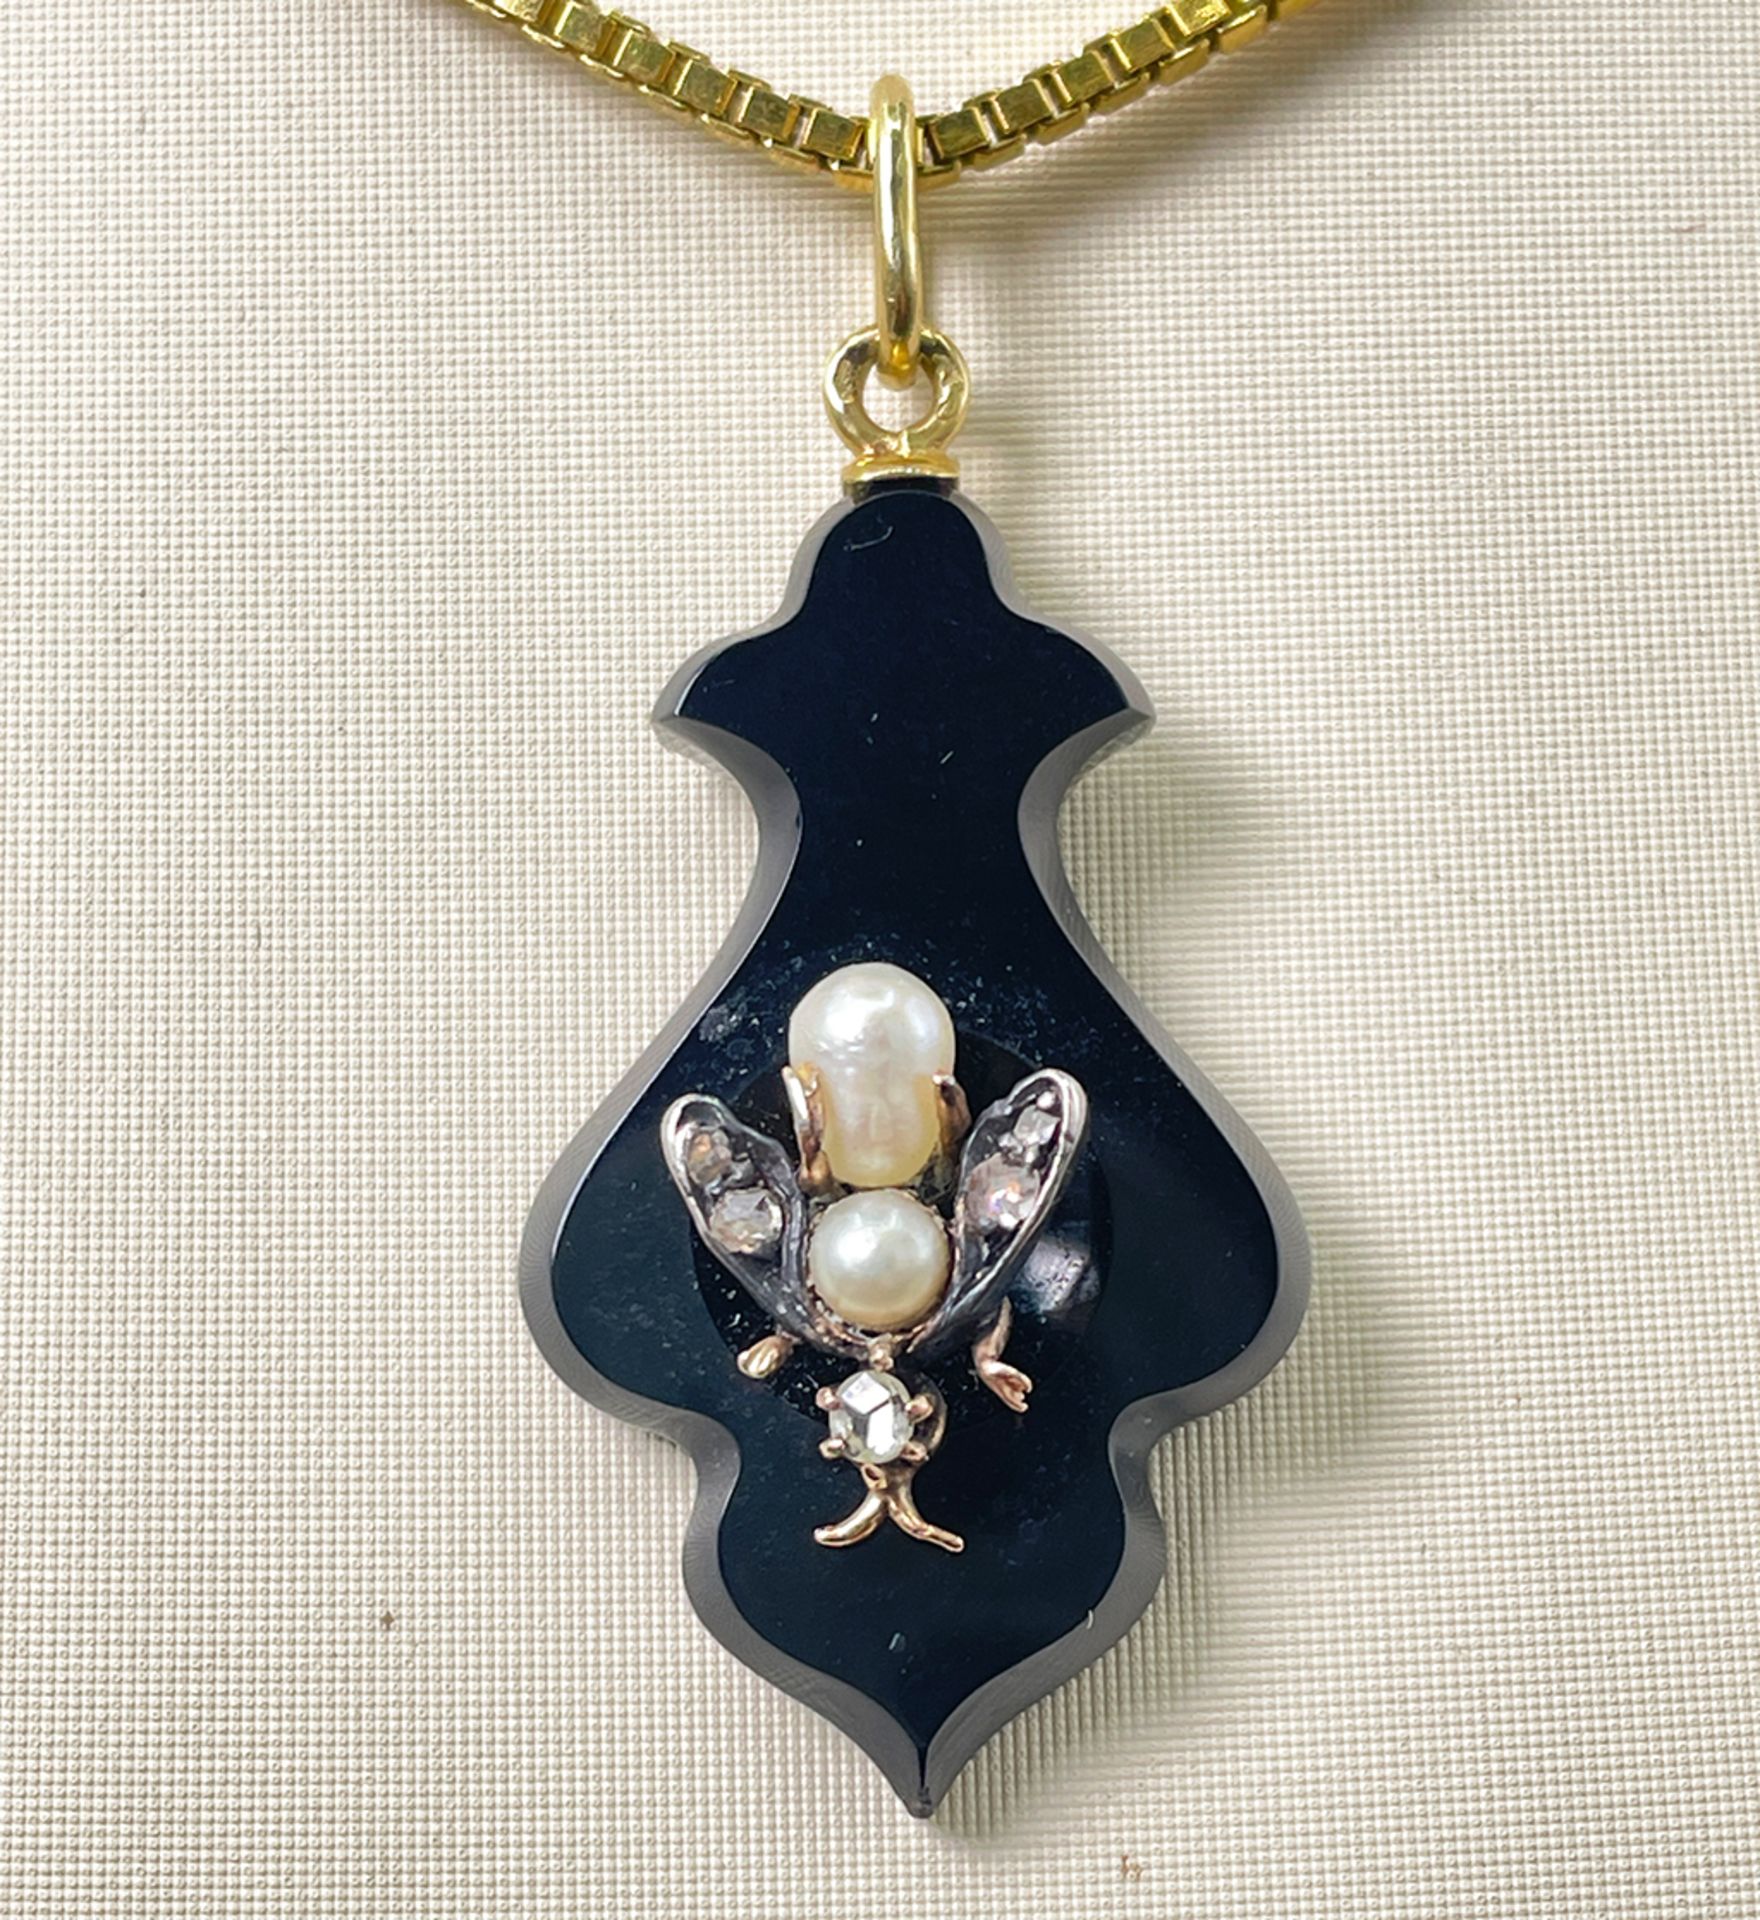 Antique onyx pendant, with 14K gold insect, pearls and diamonds - Image 3 of 5